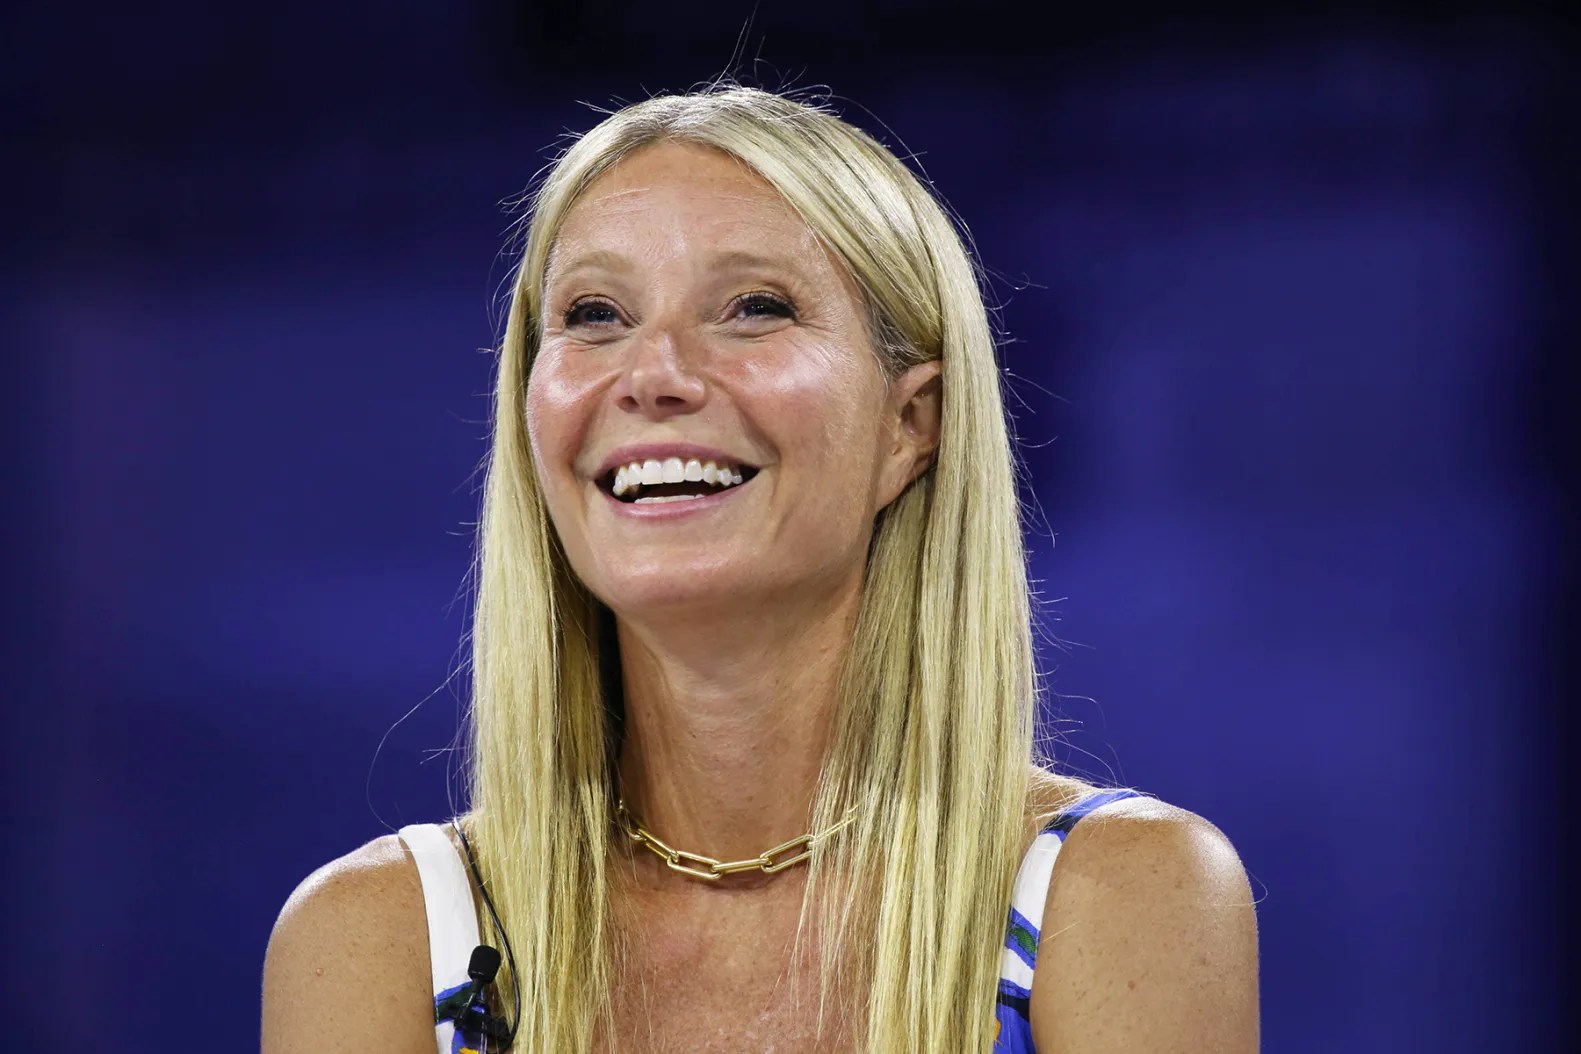 Paltrow’s ‘Shallow Hal’ Body Double Revealed Body Double’s Raw